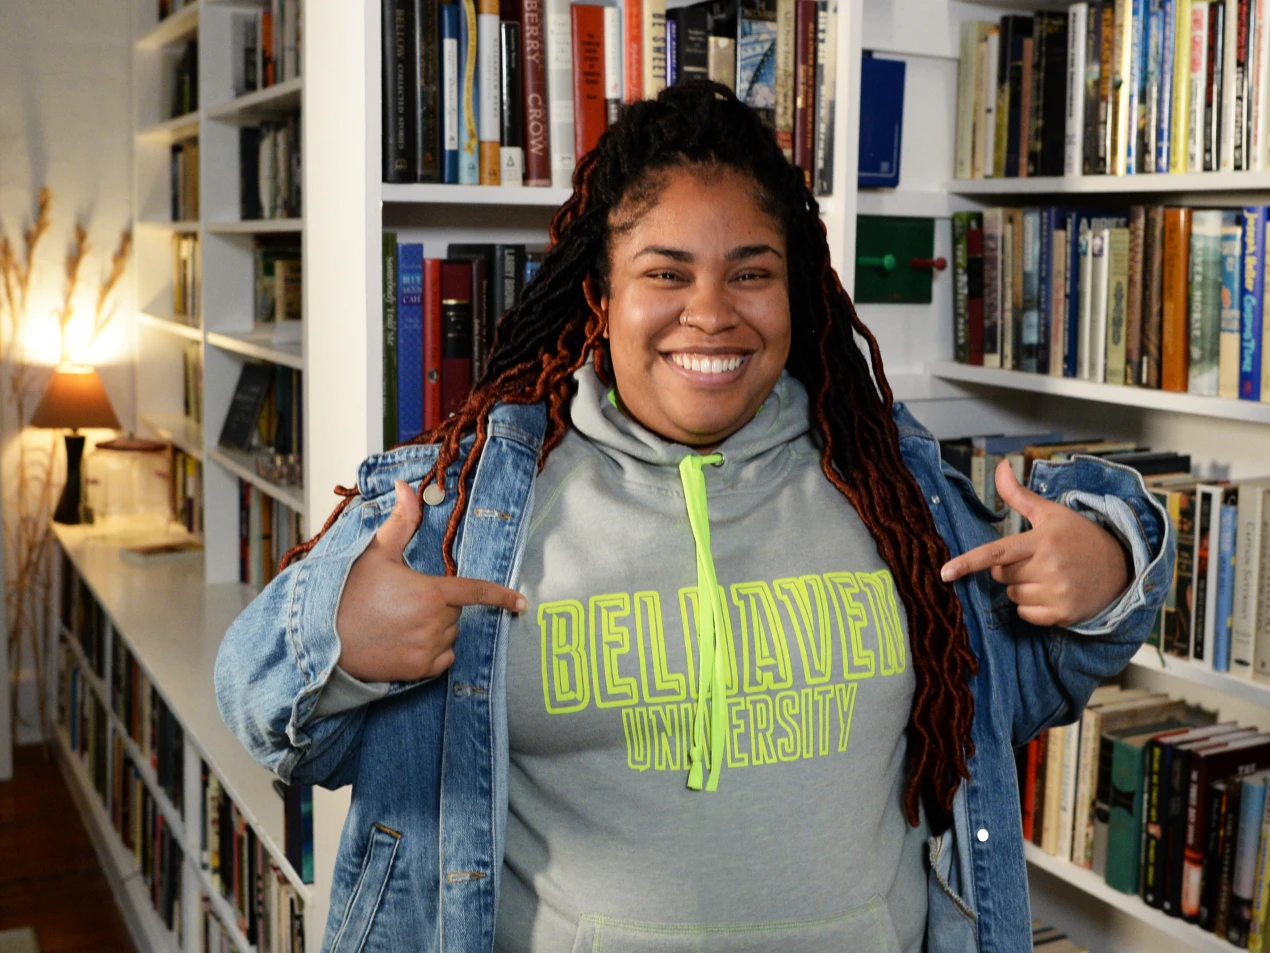 Angie Thomas pointing to the Belhaven shirt she is wearing